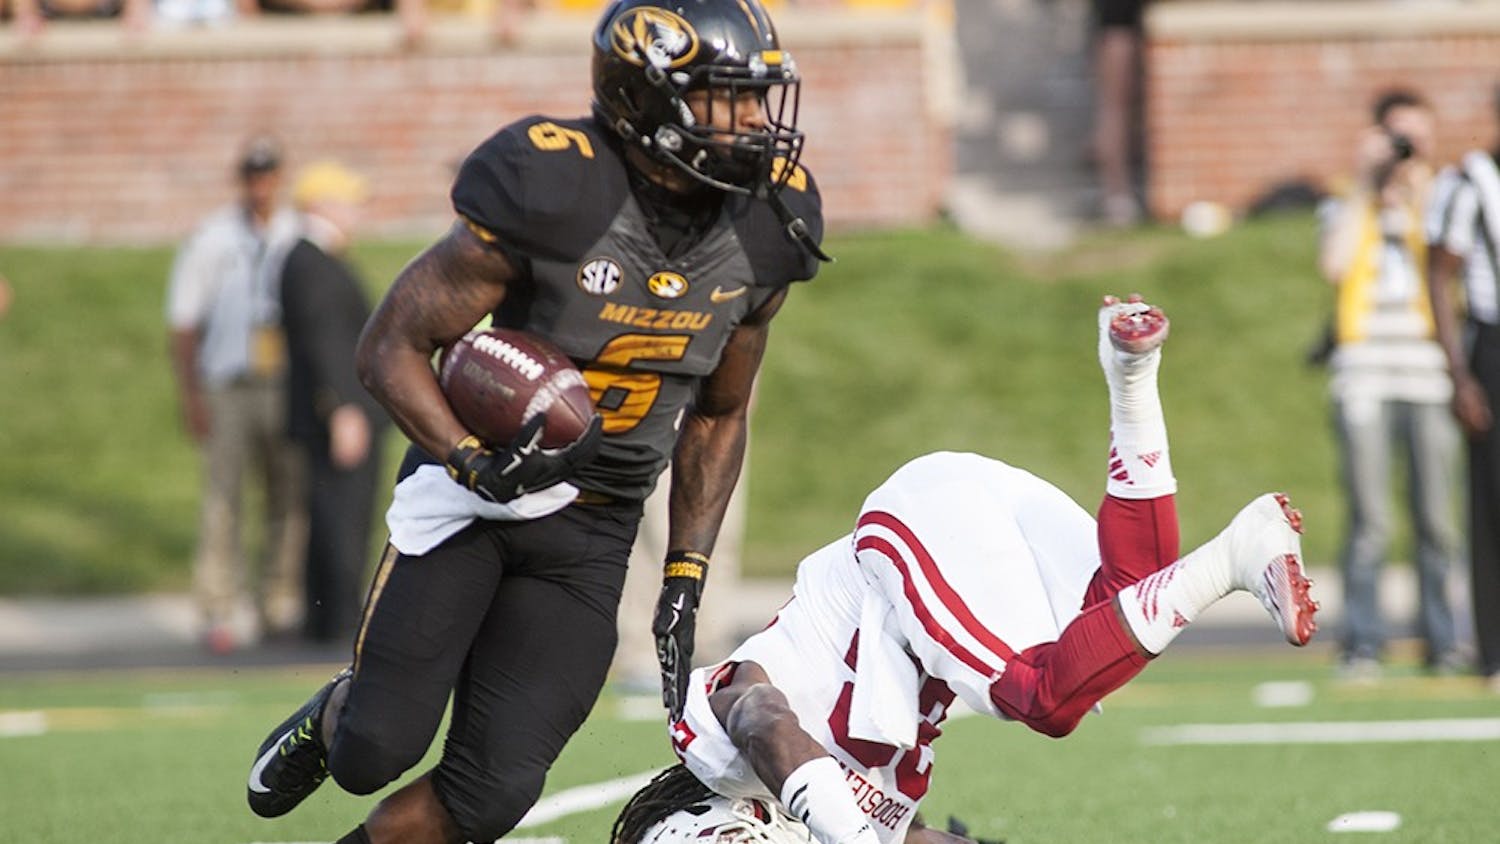 Senior cornerback Kenny Mullen falls after trying to tackle Missouri Tigers running back Marcus Murphy on Saturday at Faurot Field, in Columbia, Mo. Mullen injured his leg on the play and will be out for the remainder of the season.